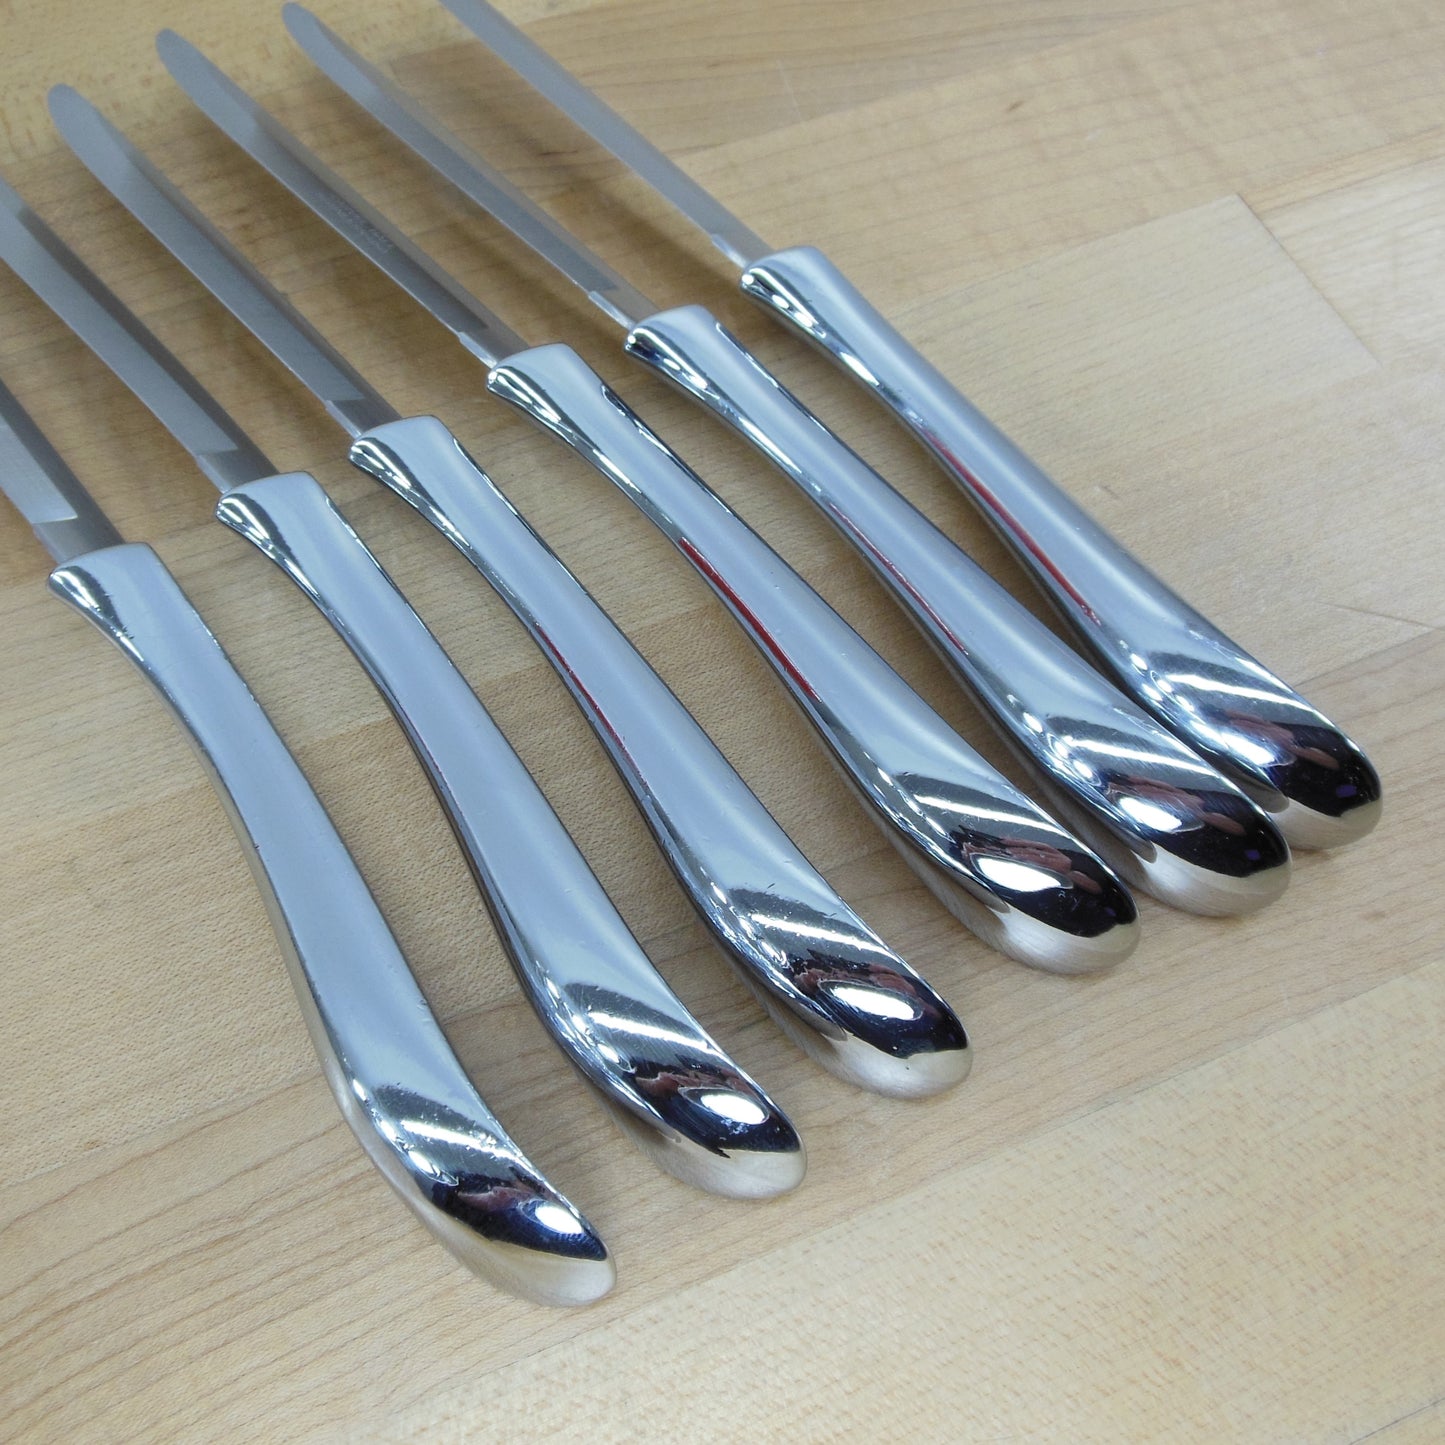 Carvel Hall Steak Knives Stainless Steel Chrome Curved Handle 6 Set Used